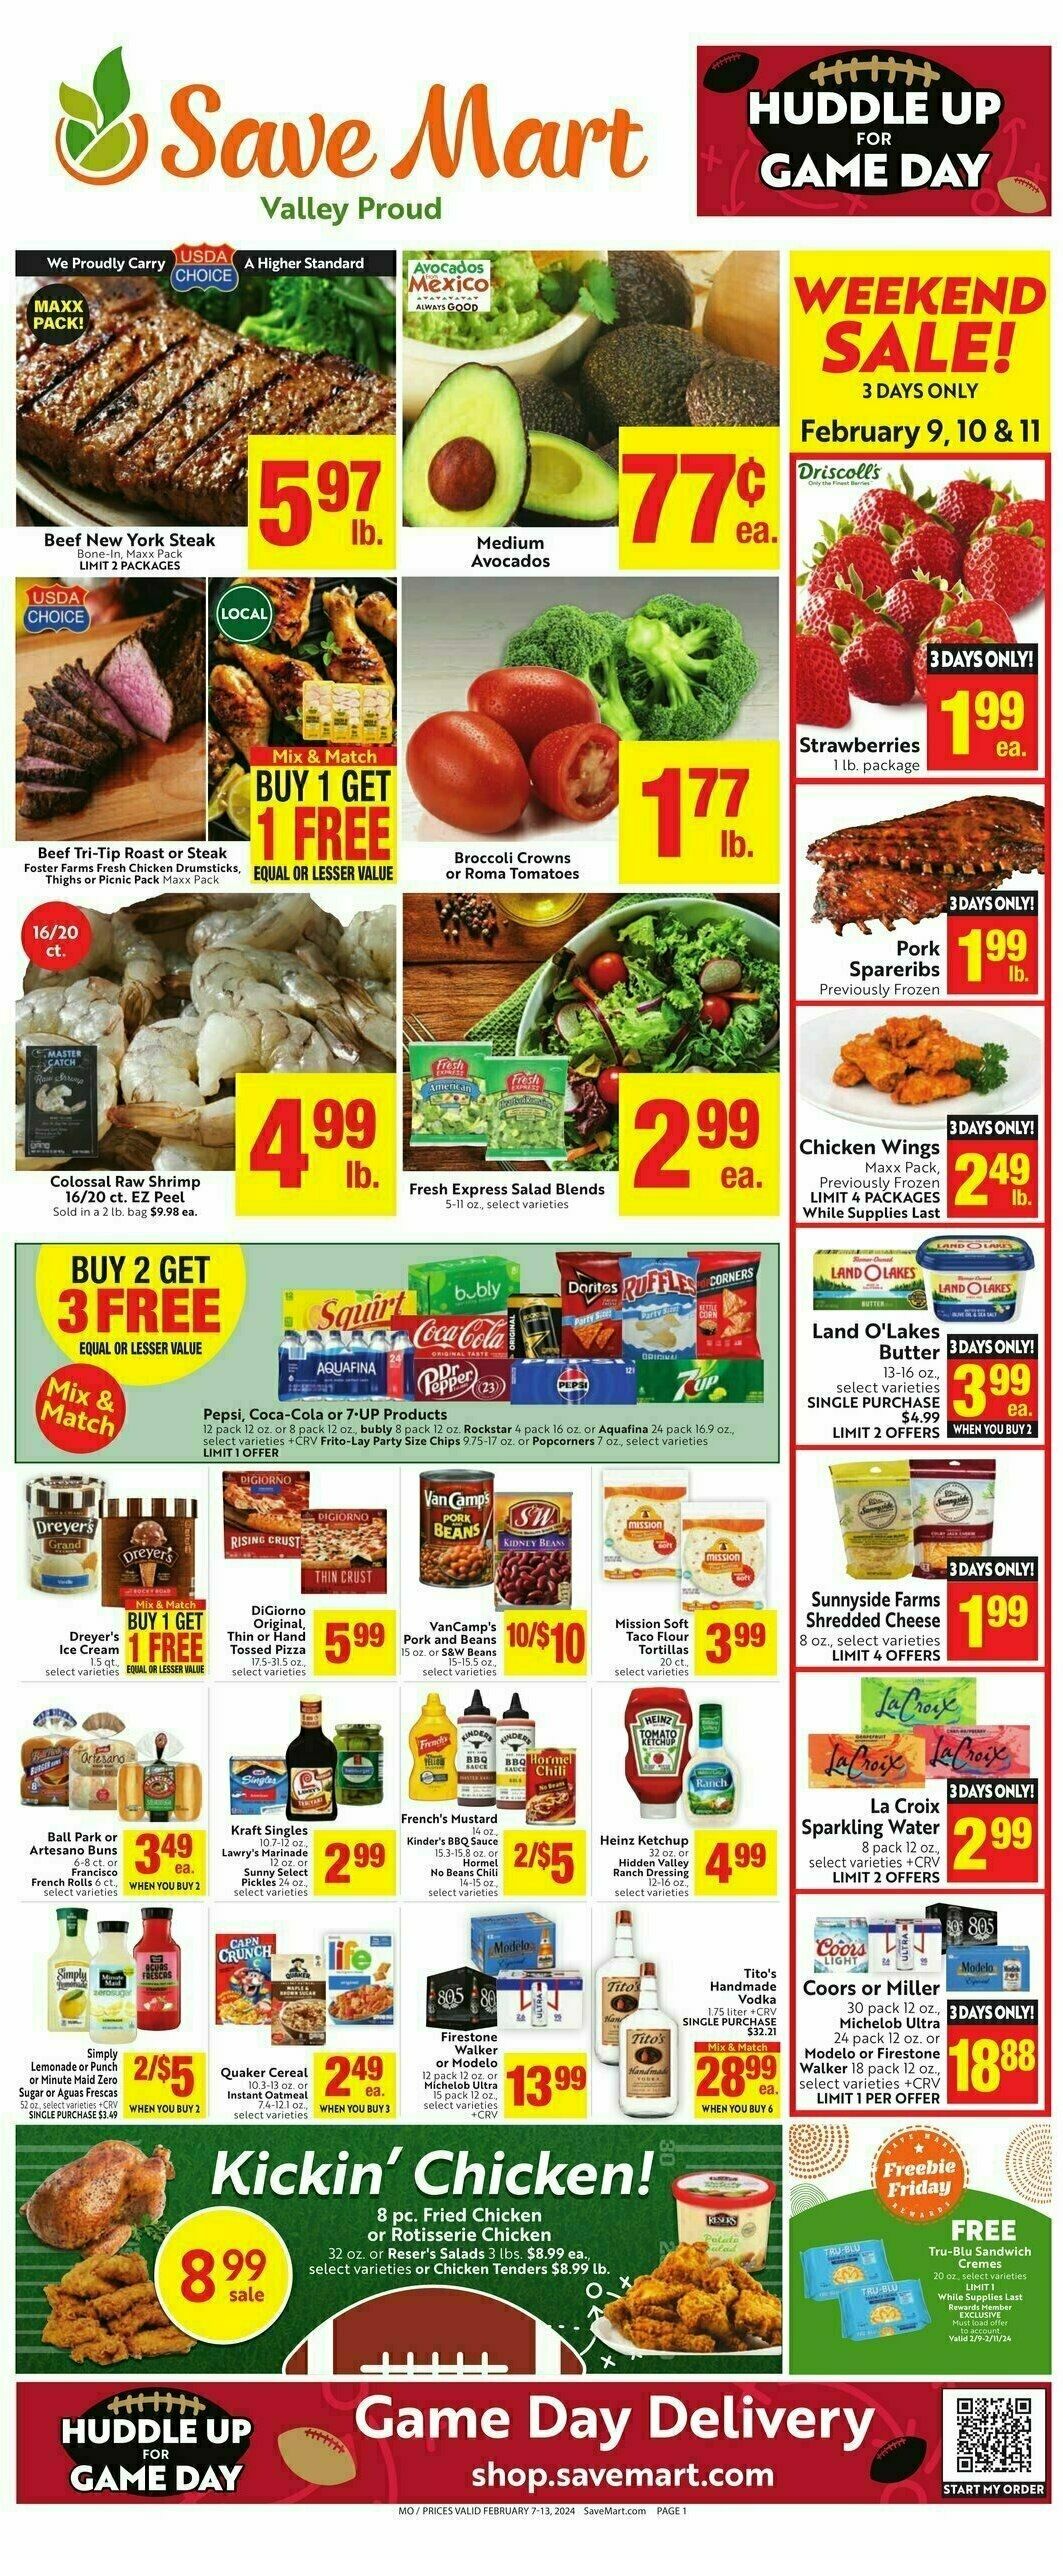 Save Mart Weekly Ad from February 7